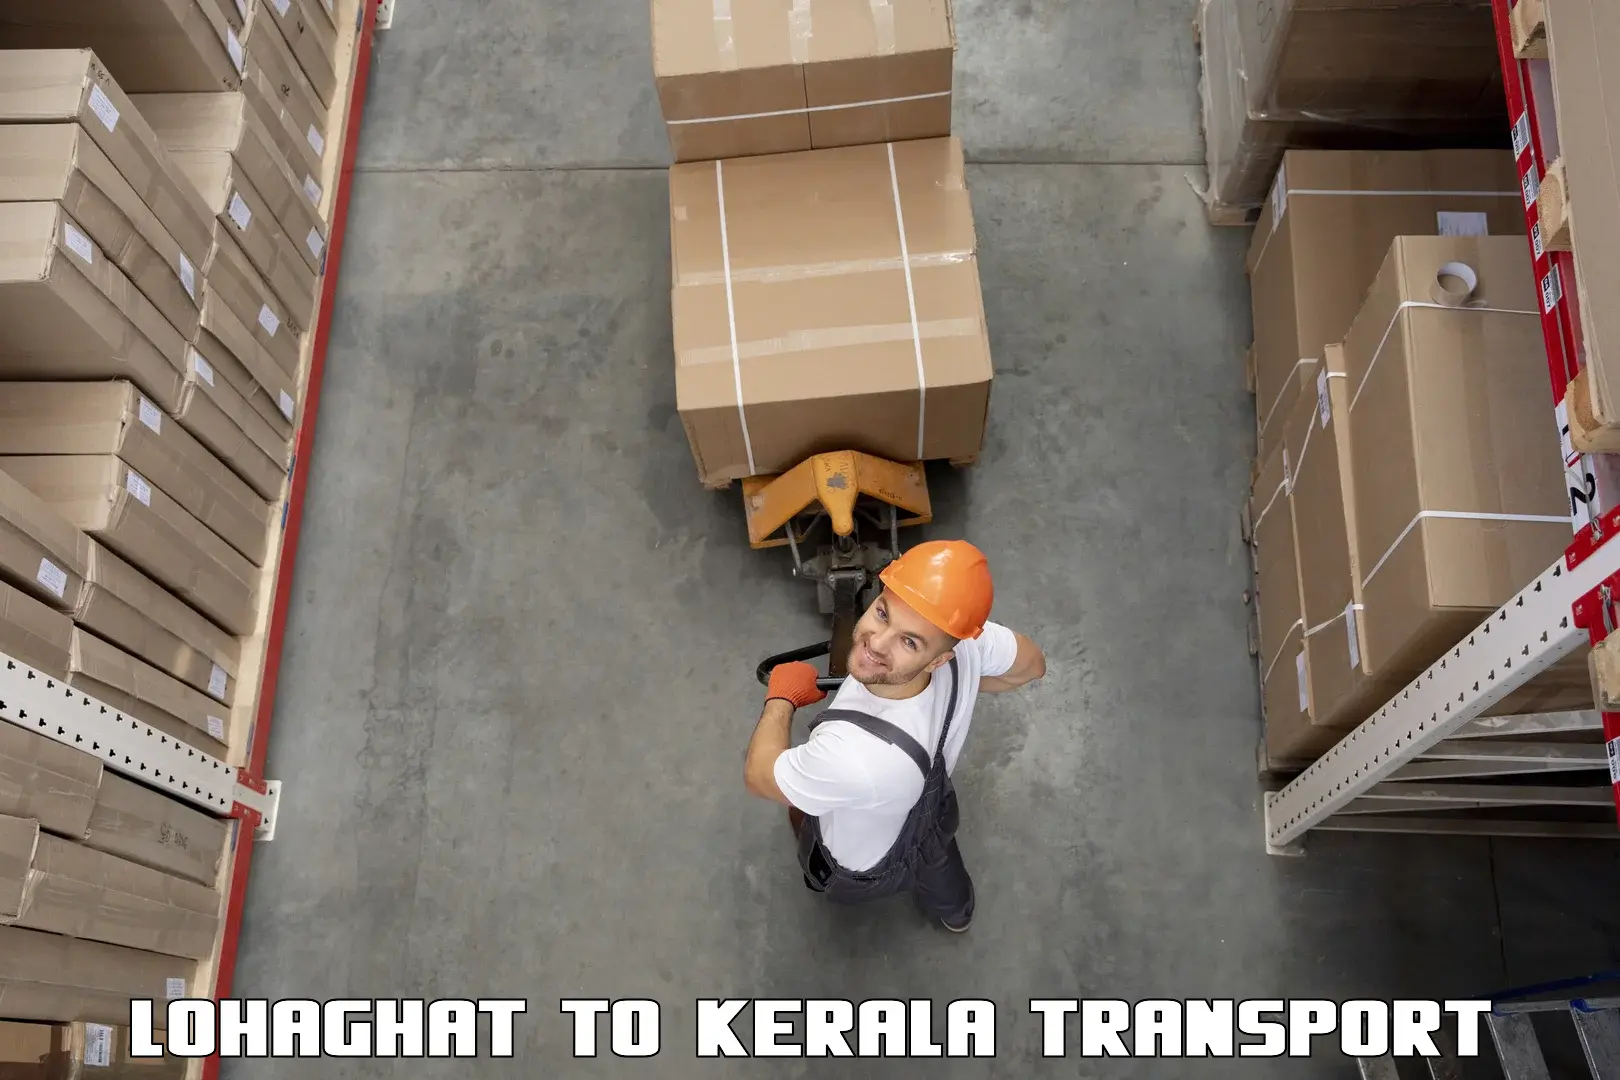 Air cargo transport services Lohaghat to Cochin Port Kochi